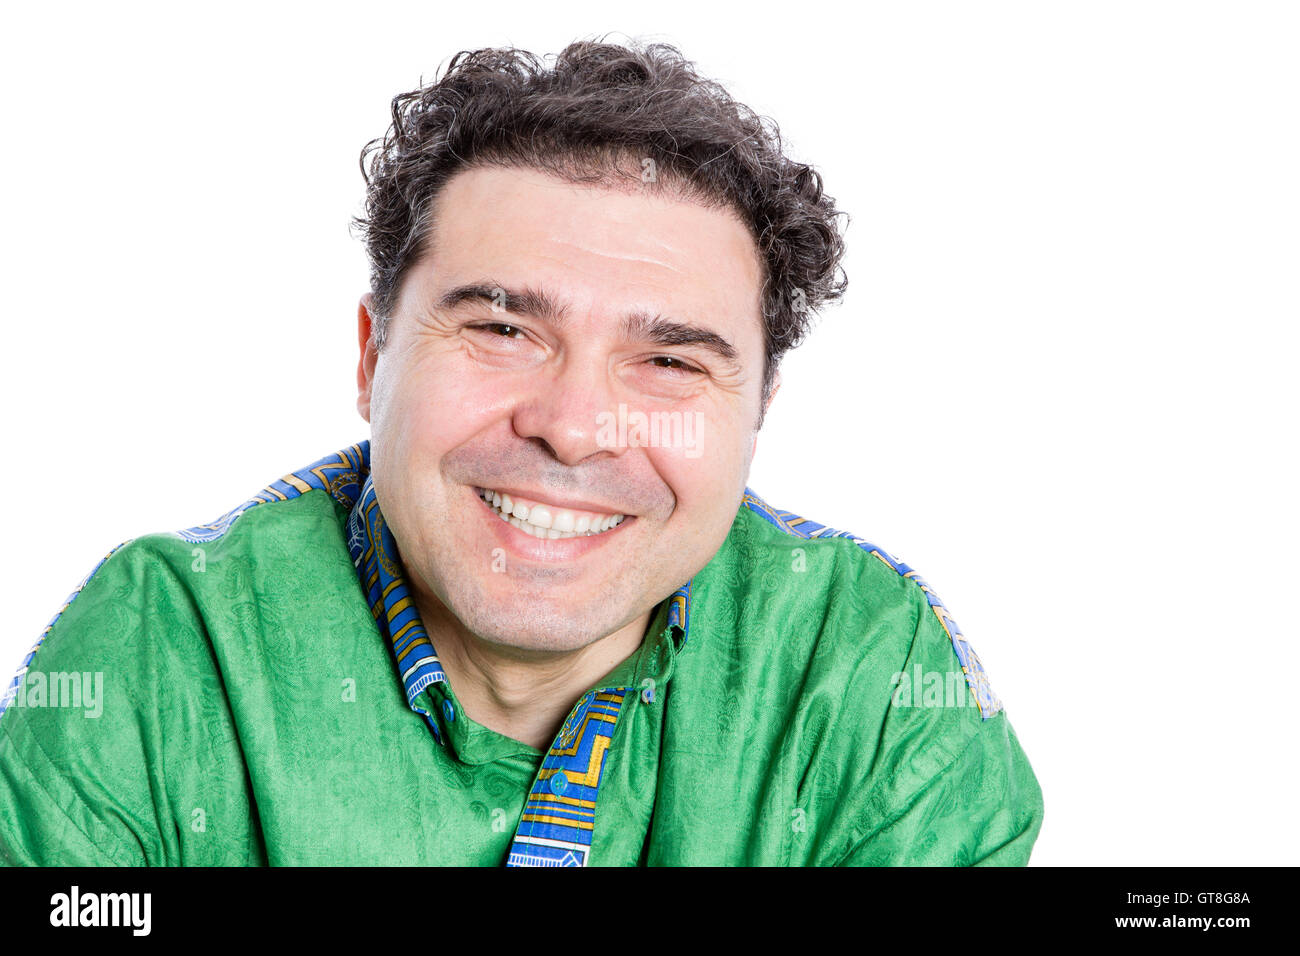 Happy handsome man with curly brown hair wearing a green afro shirt looking at the camera with a wide beaming smile of pleasure Stock Photo